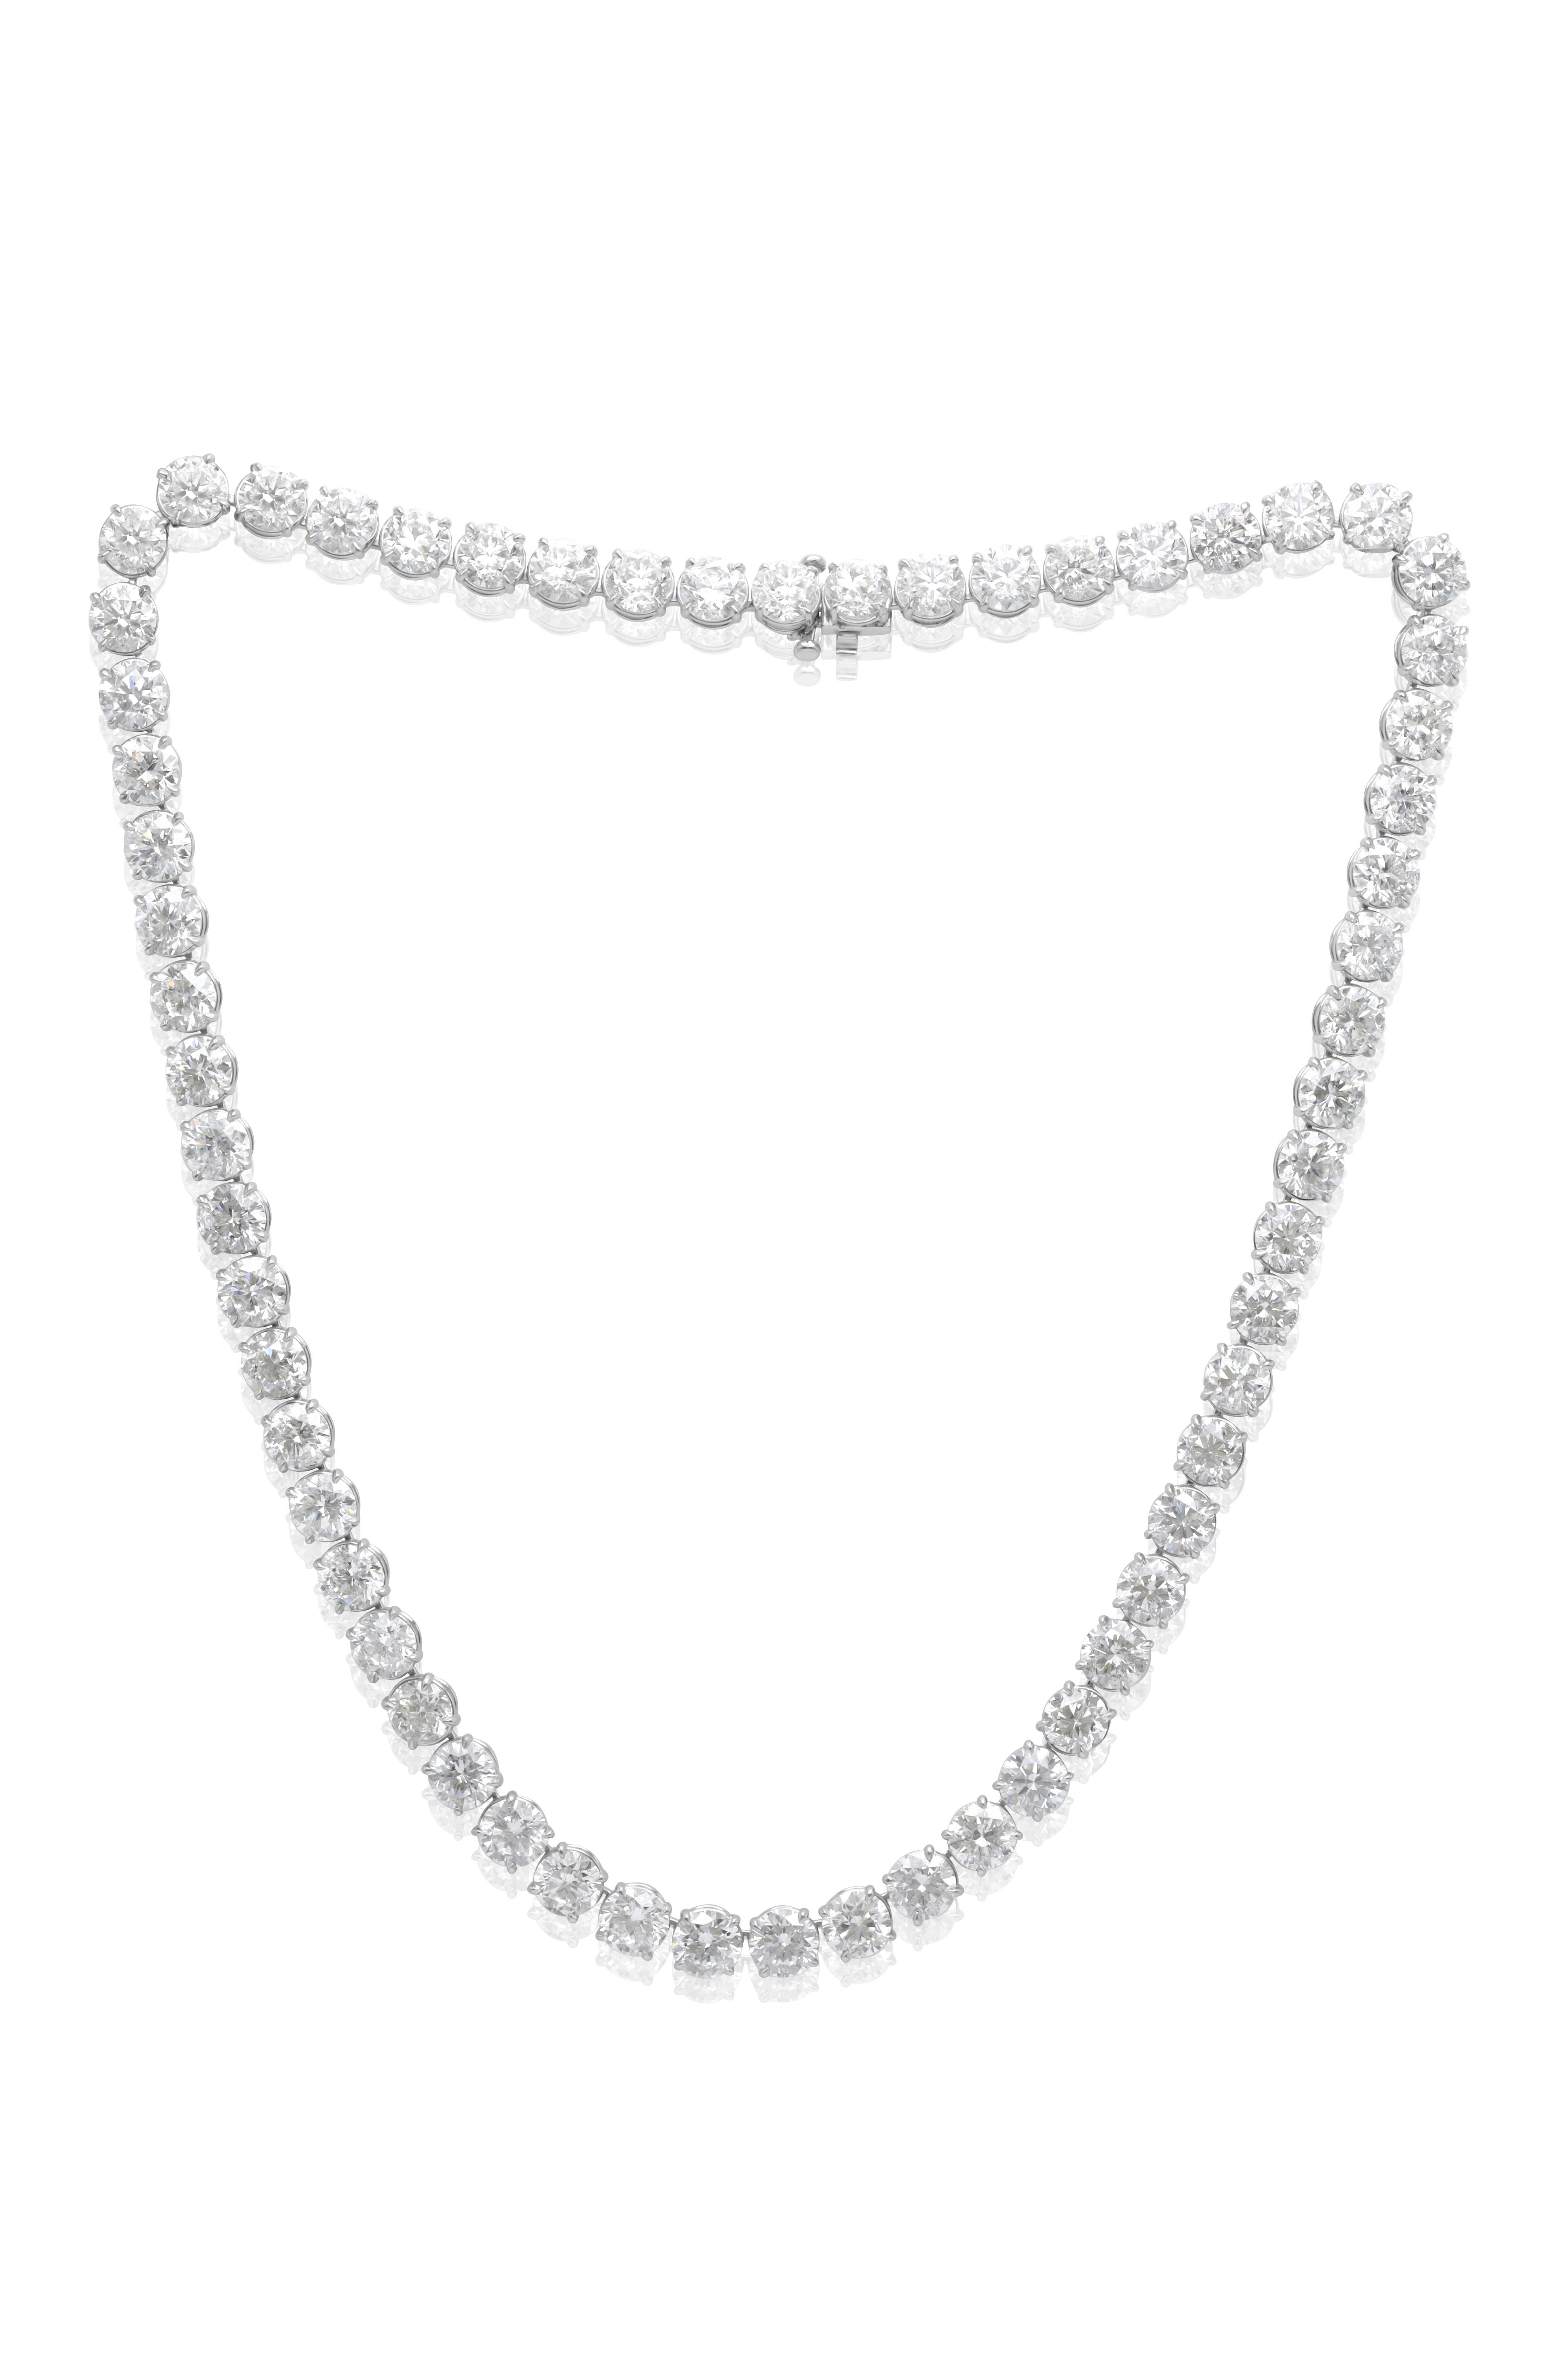 Round Cut Diana M. Custom 40.30 Cts 4 Prong  Diamond 18k White Gold Classic  Necklace  For Sale